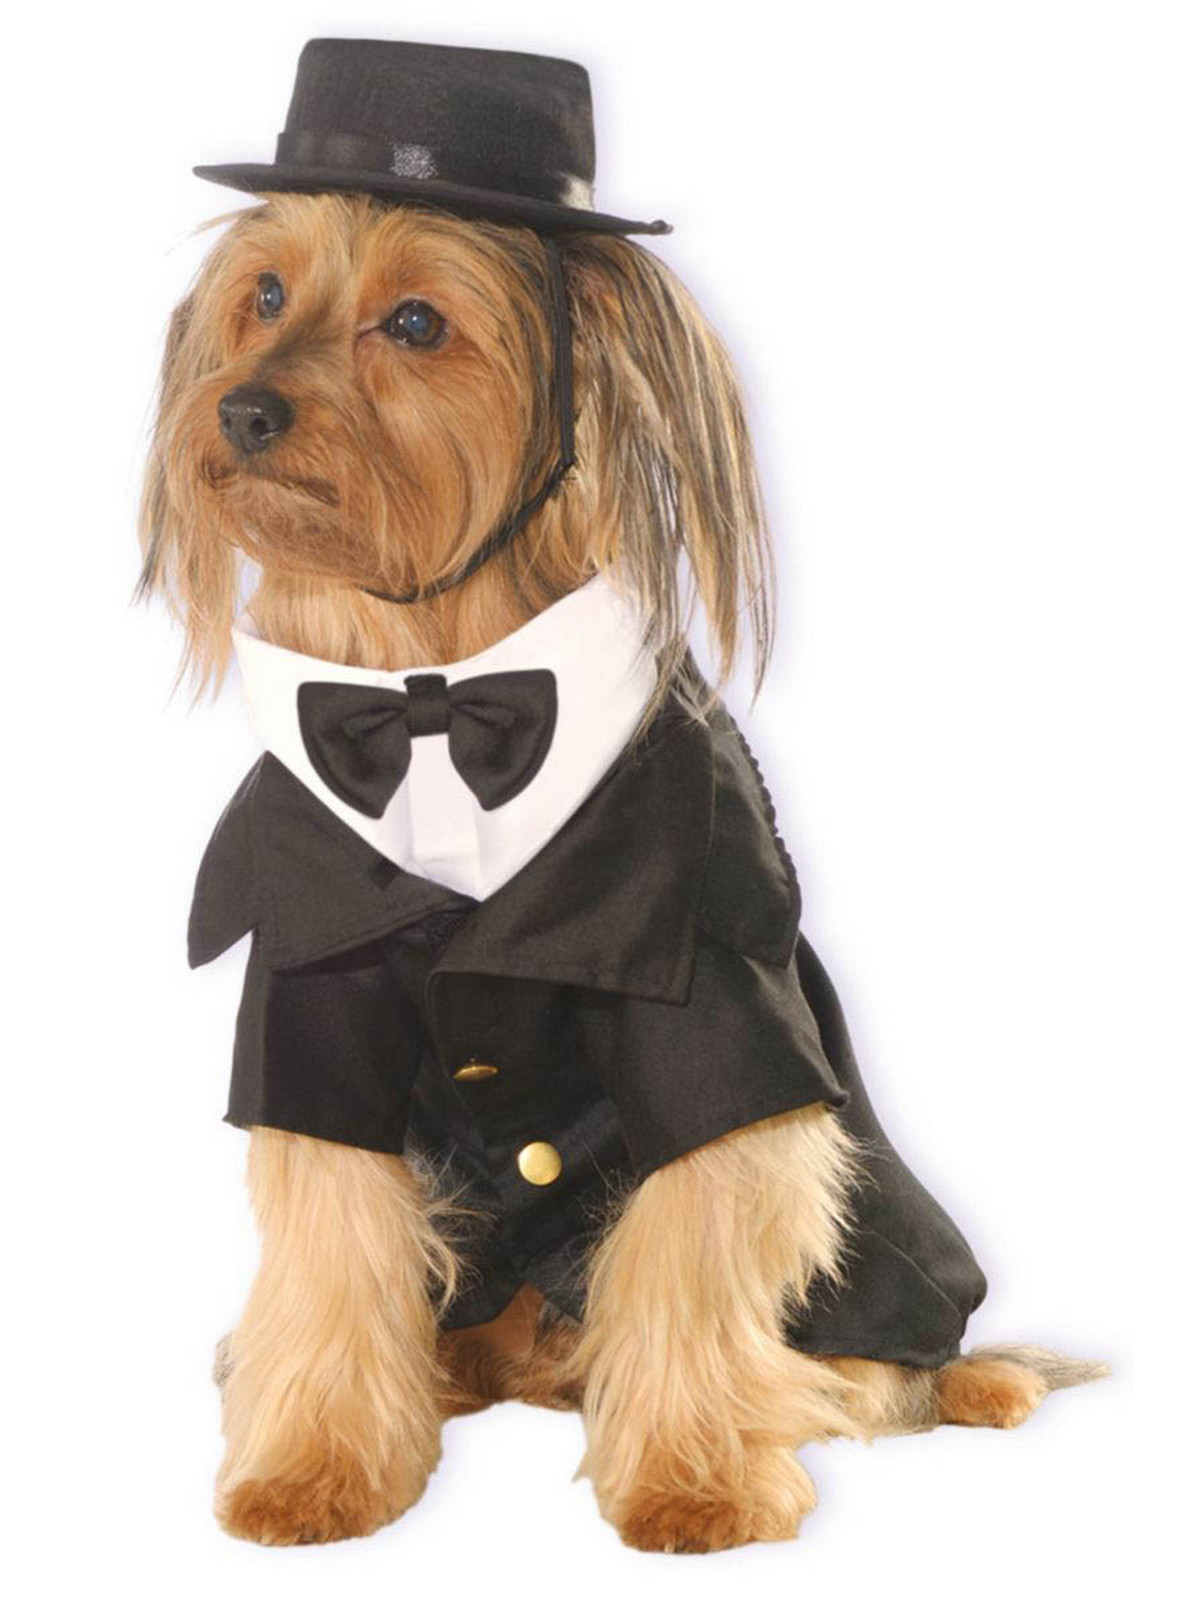 Primary image for Rubie's Dapper Dog Pet Costume, Large